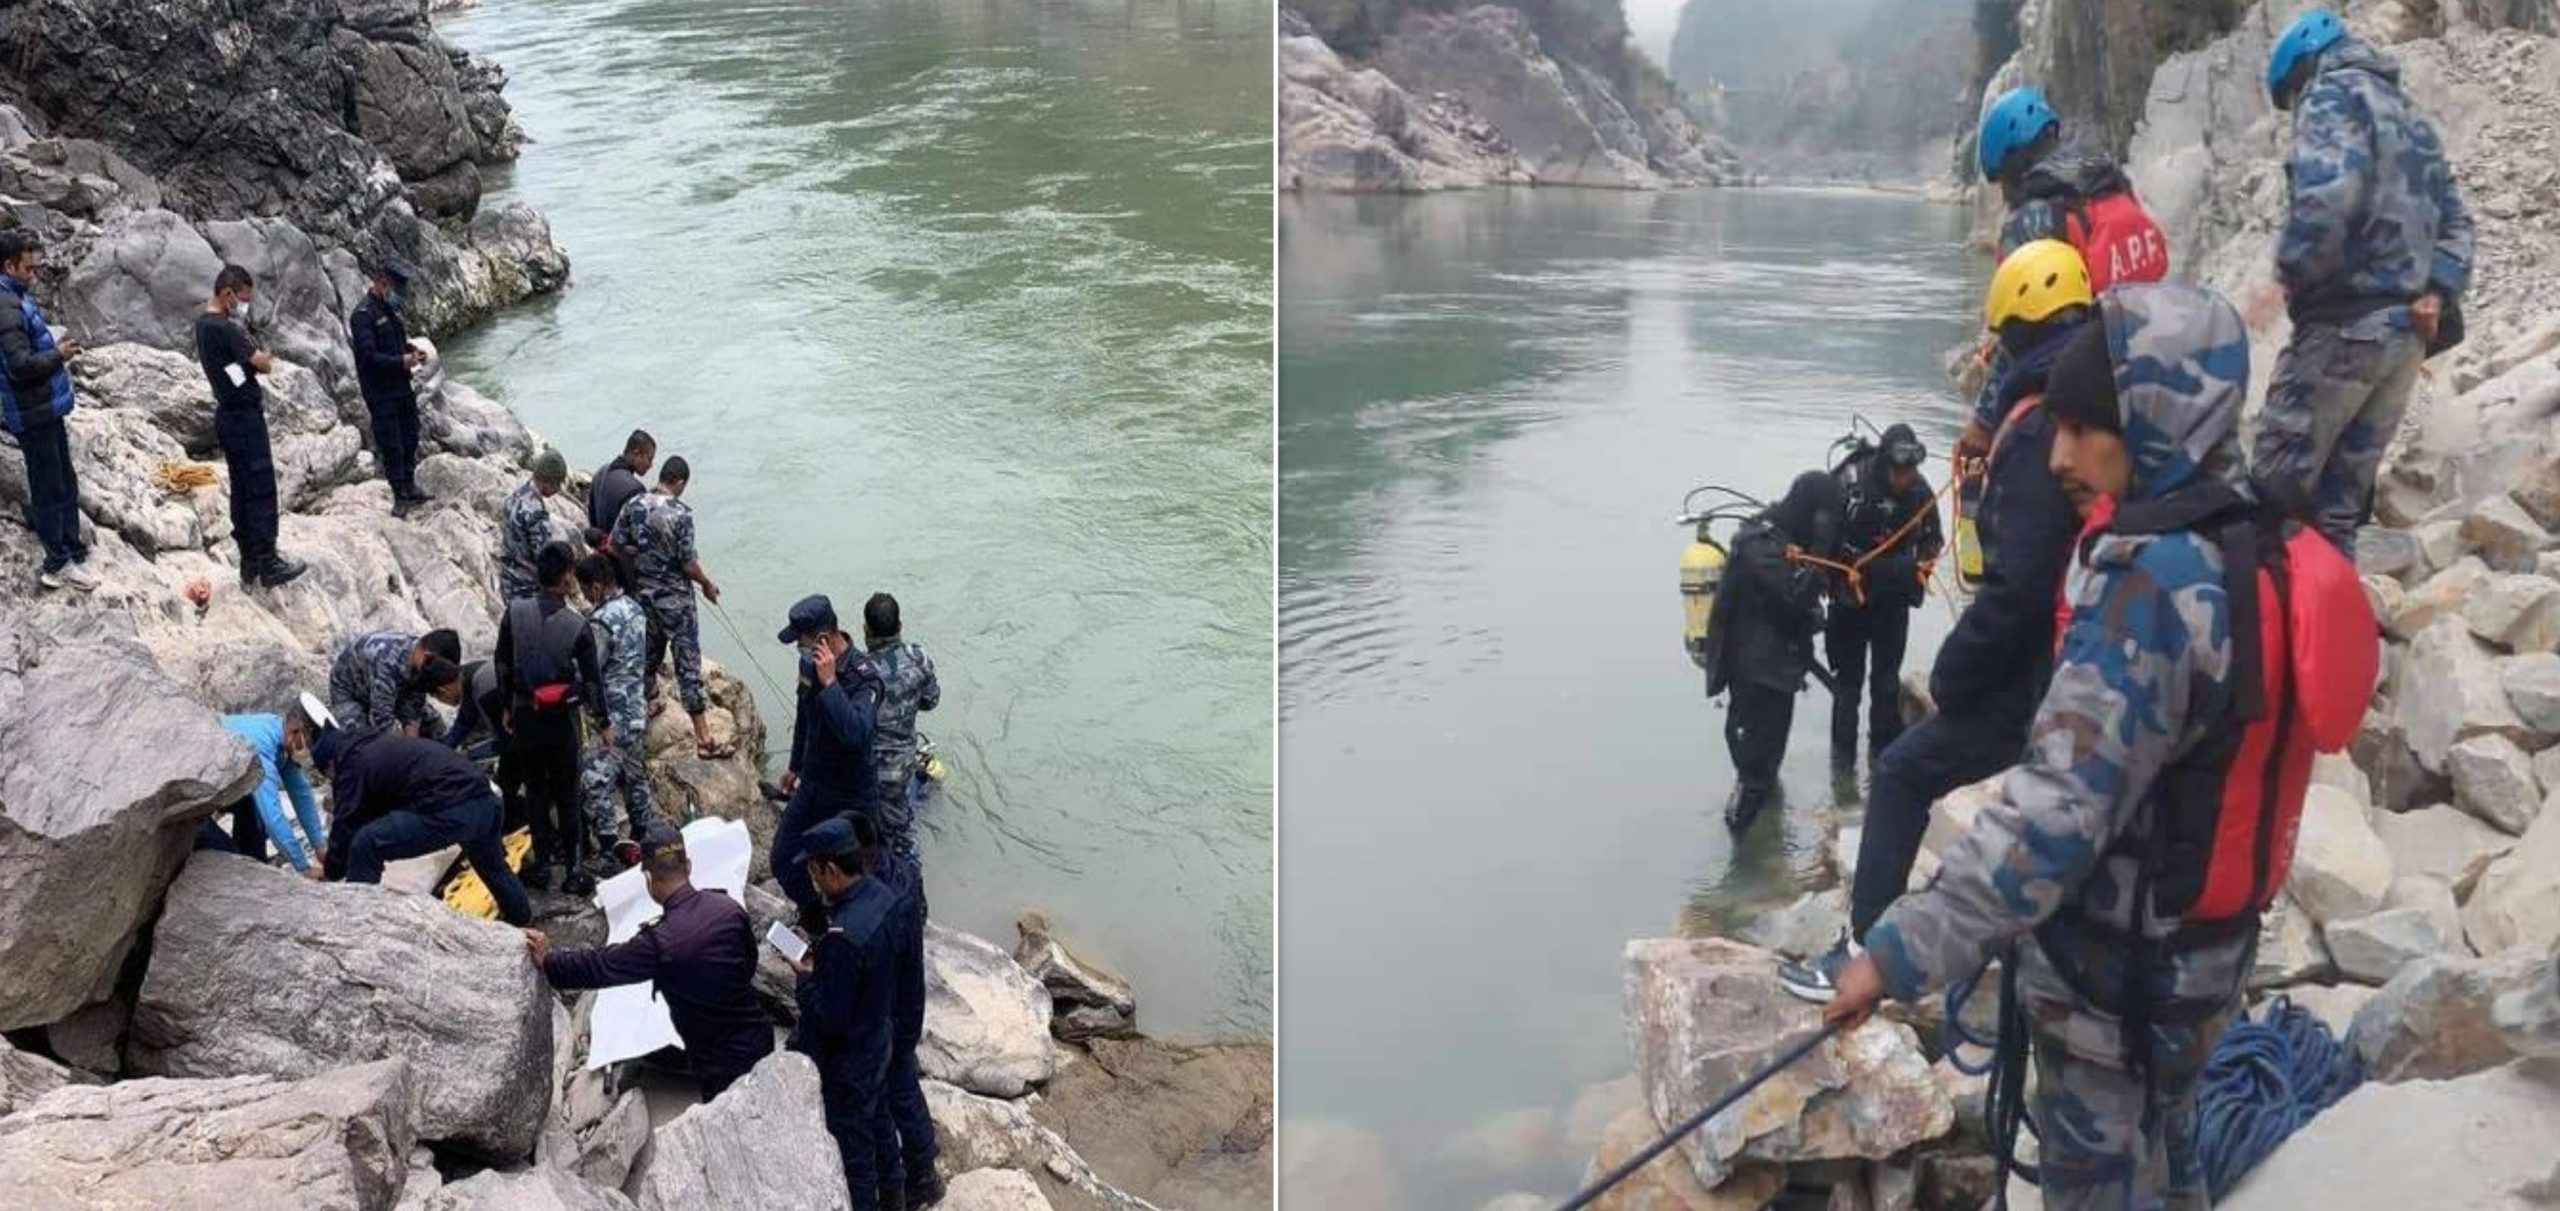 Jeep plunges into Trishuli River, diving team searching for passengers